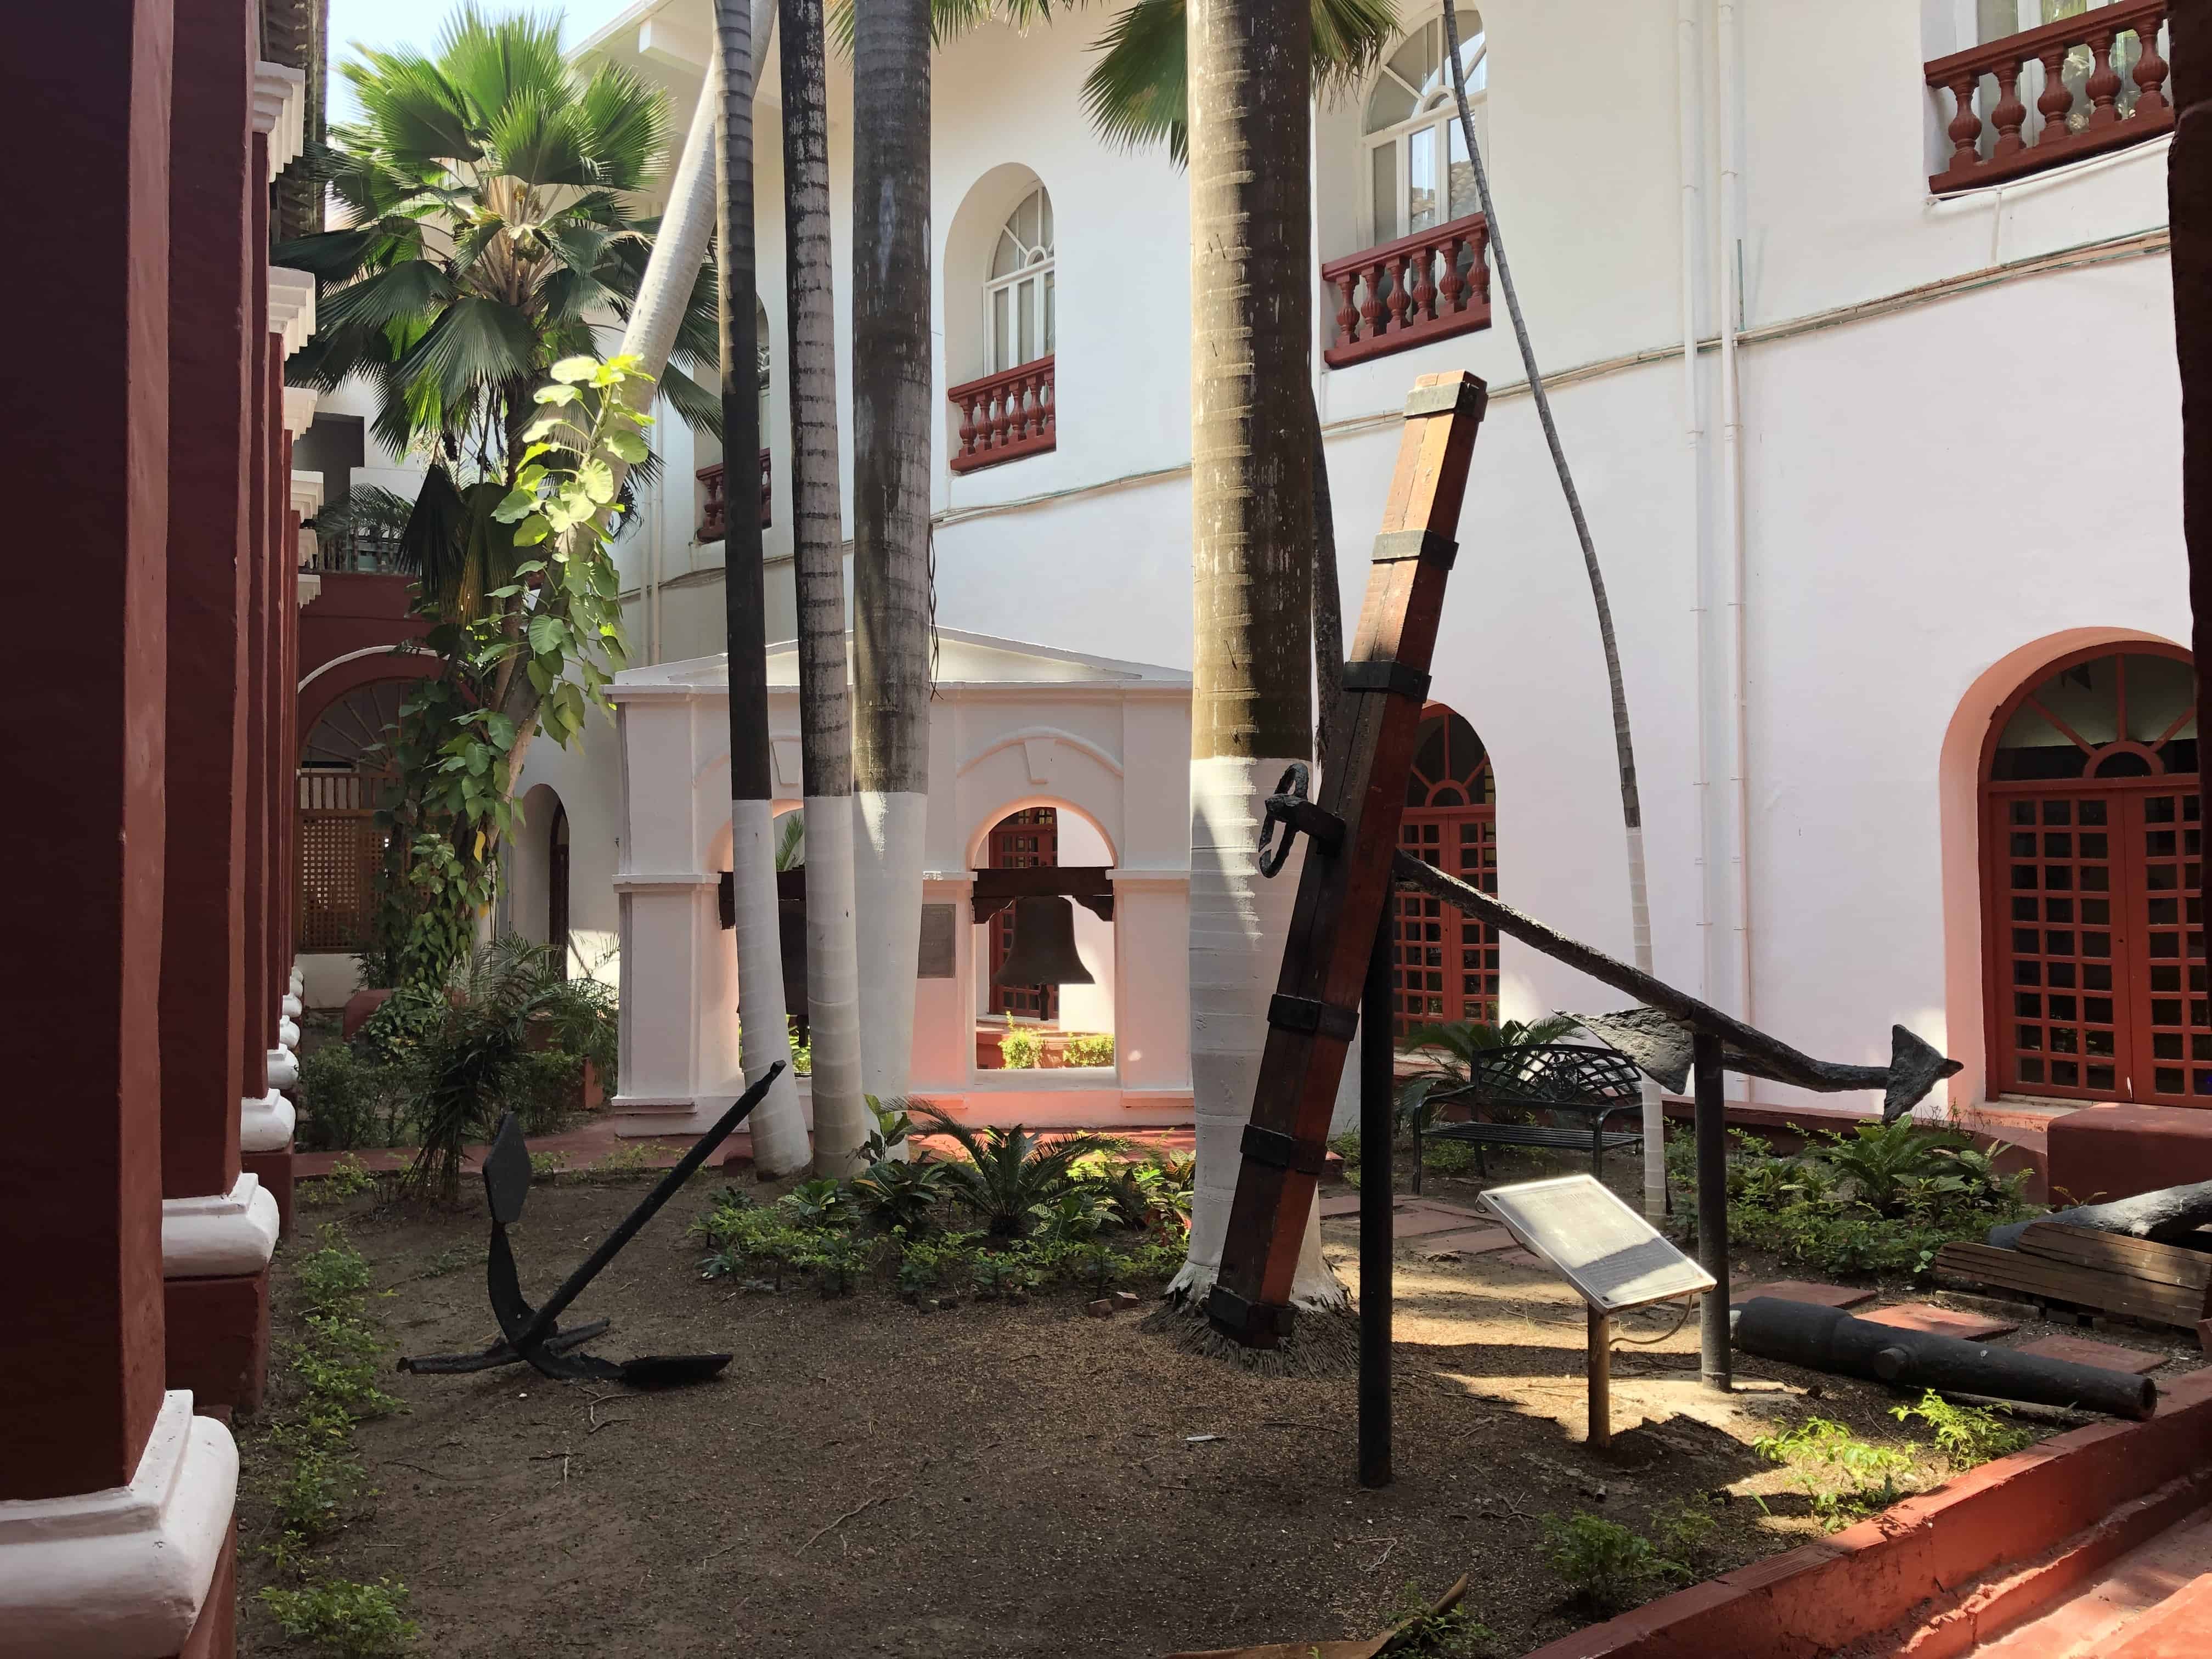 Courtyard at the Caribbean Naval Museum in Cartagena, Colombia